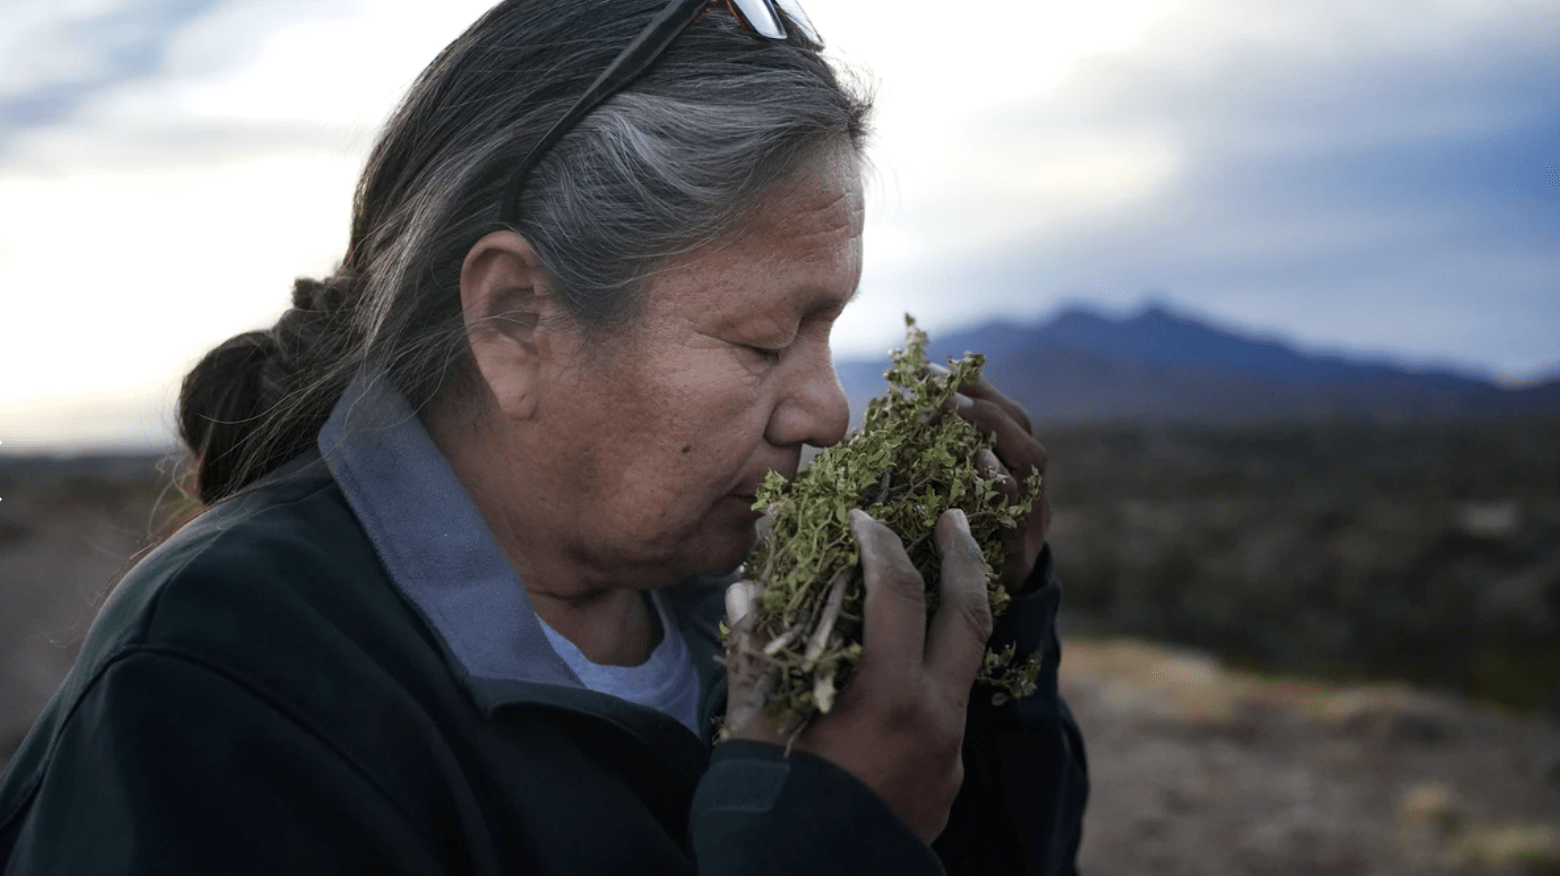 Native American woman smelling herbs. 